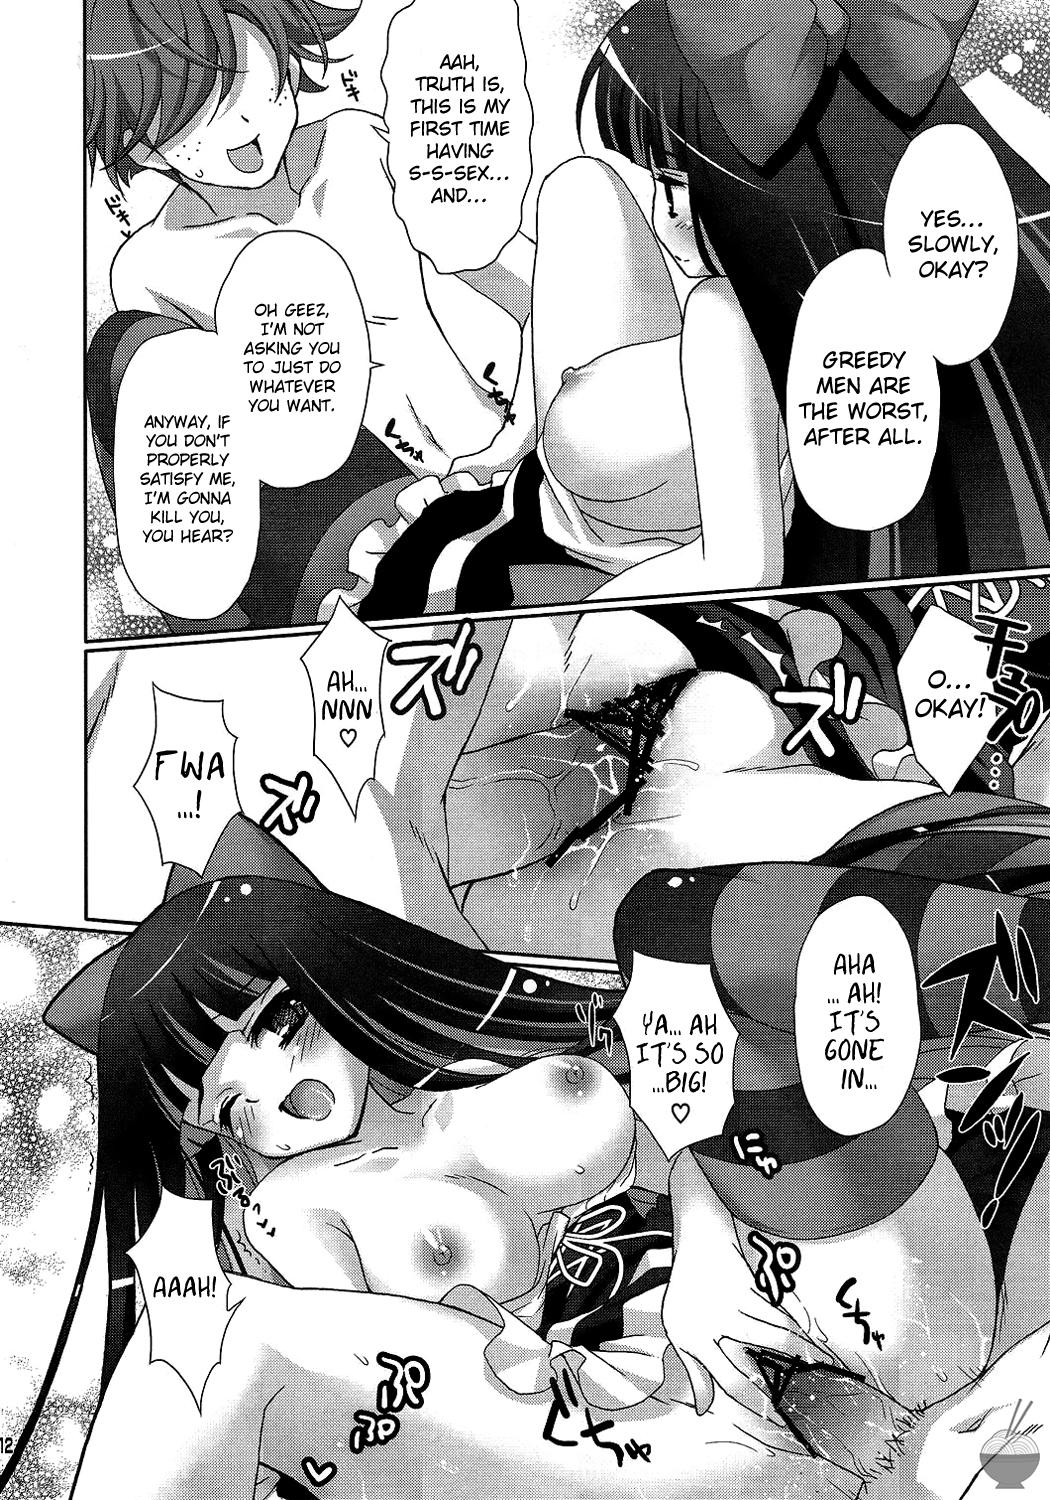 Blow Goth Loli wo Kita Tenshi | The Angel Wears Gothic Lolita - Panty and stocking with garterbelt Sluts - Page 12